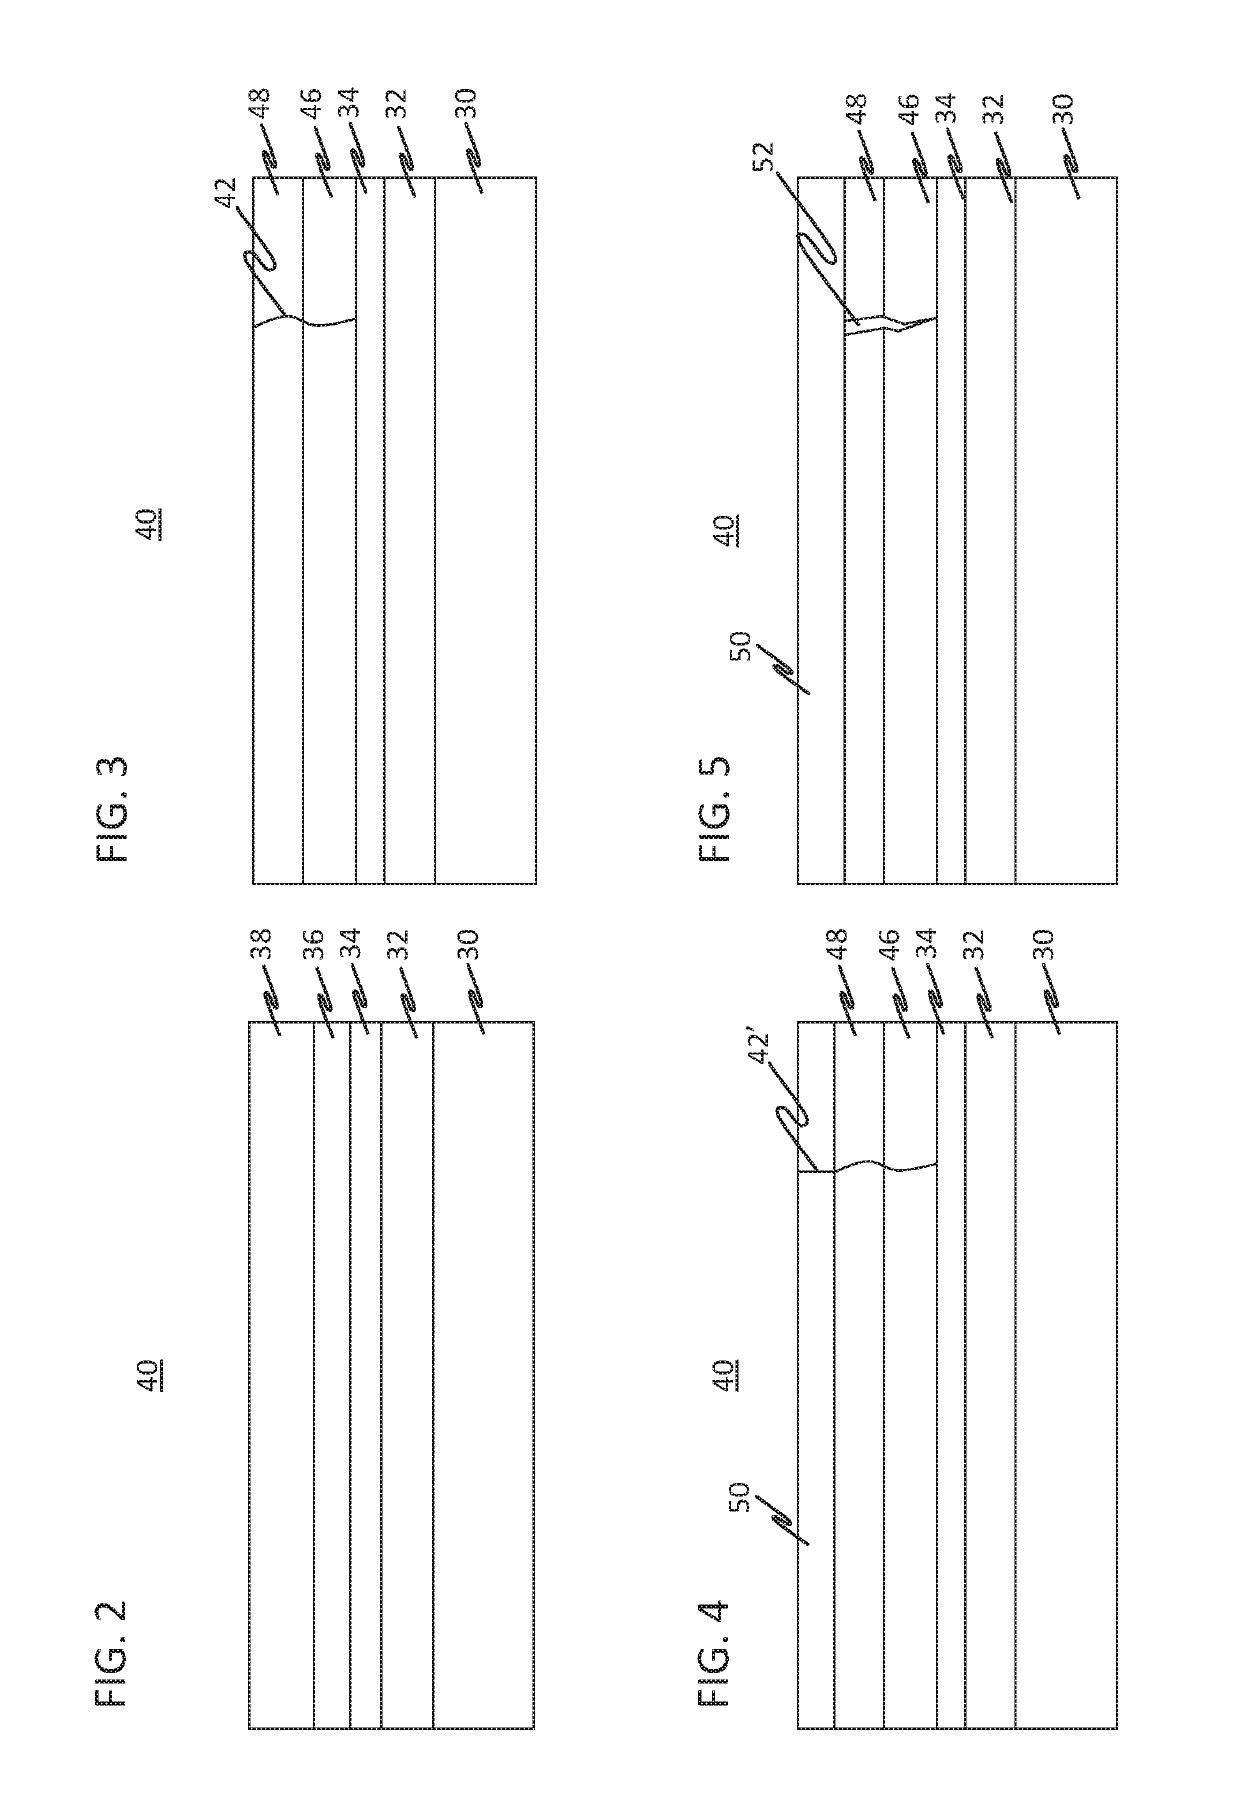 Phase change memory array with integrated polycrystalline diodes